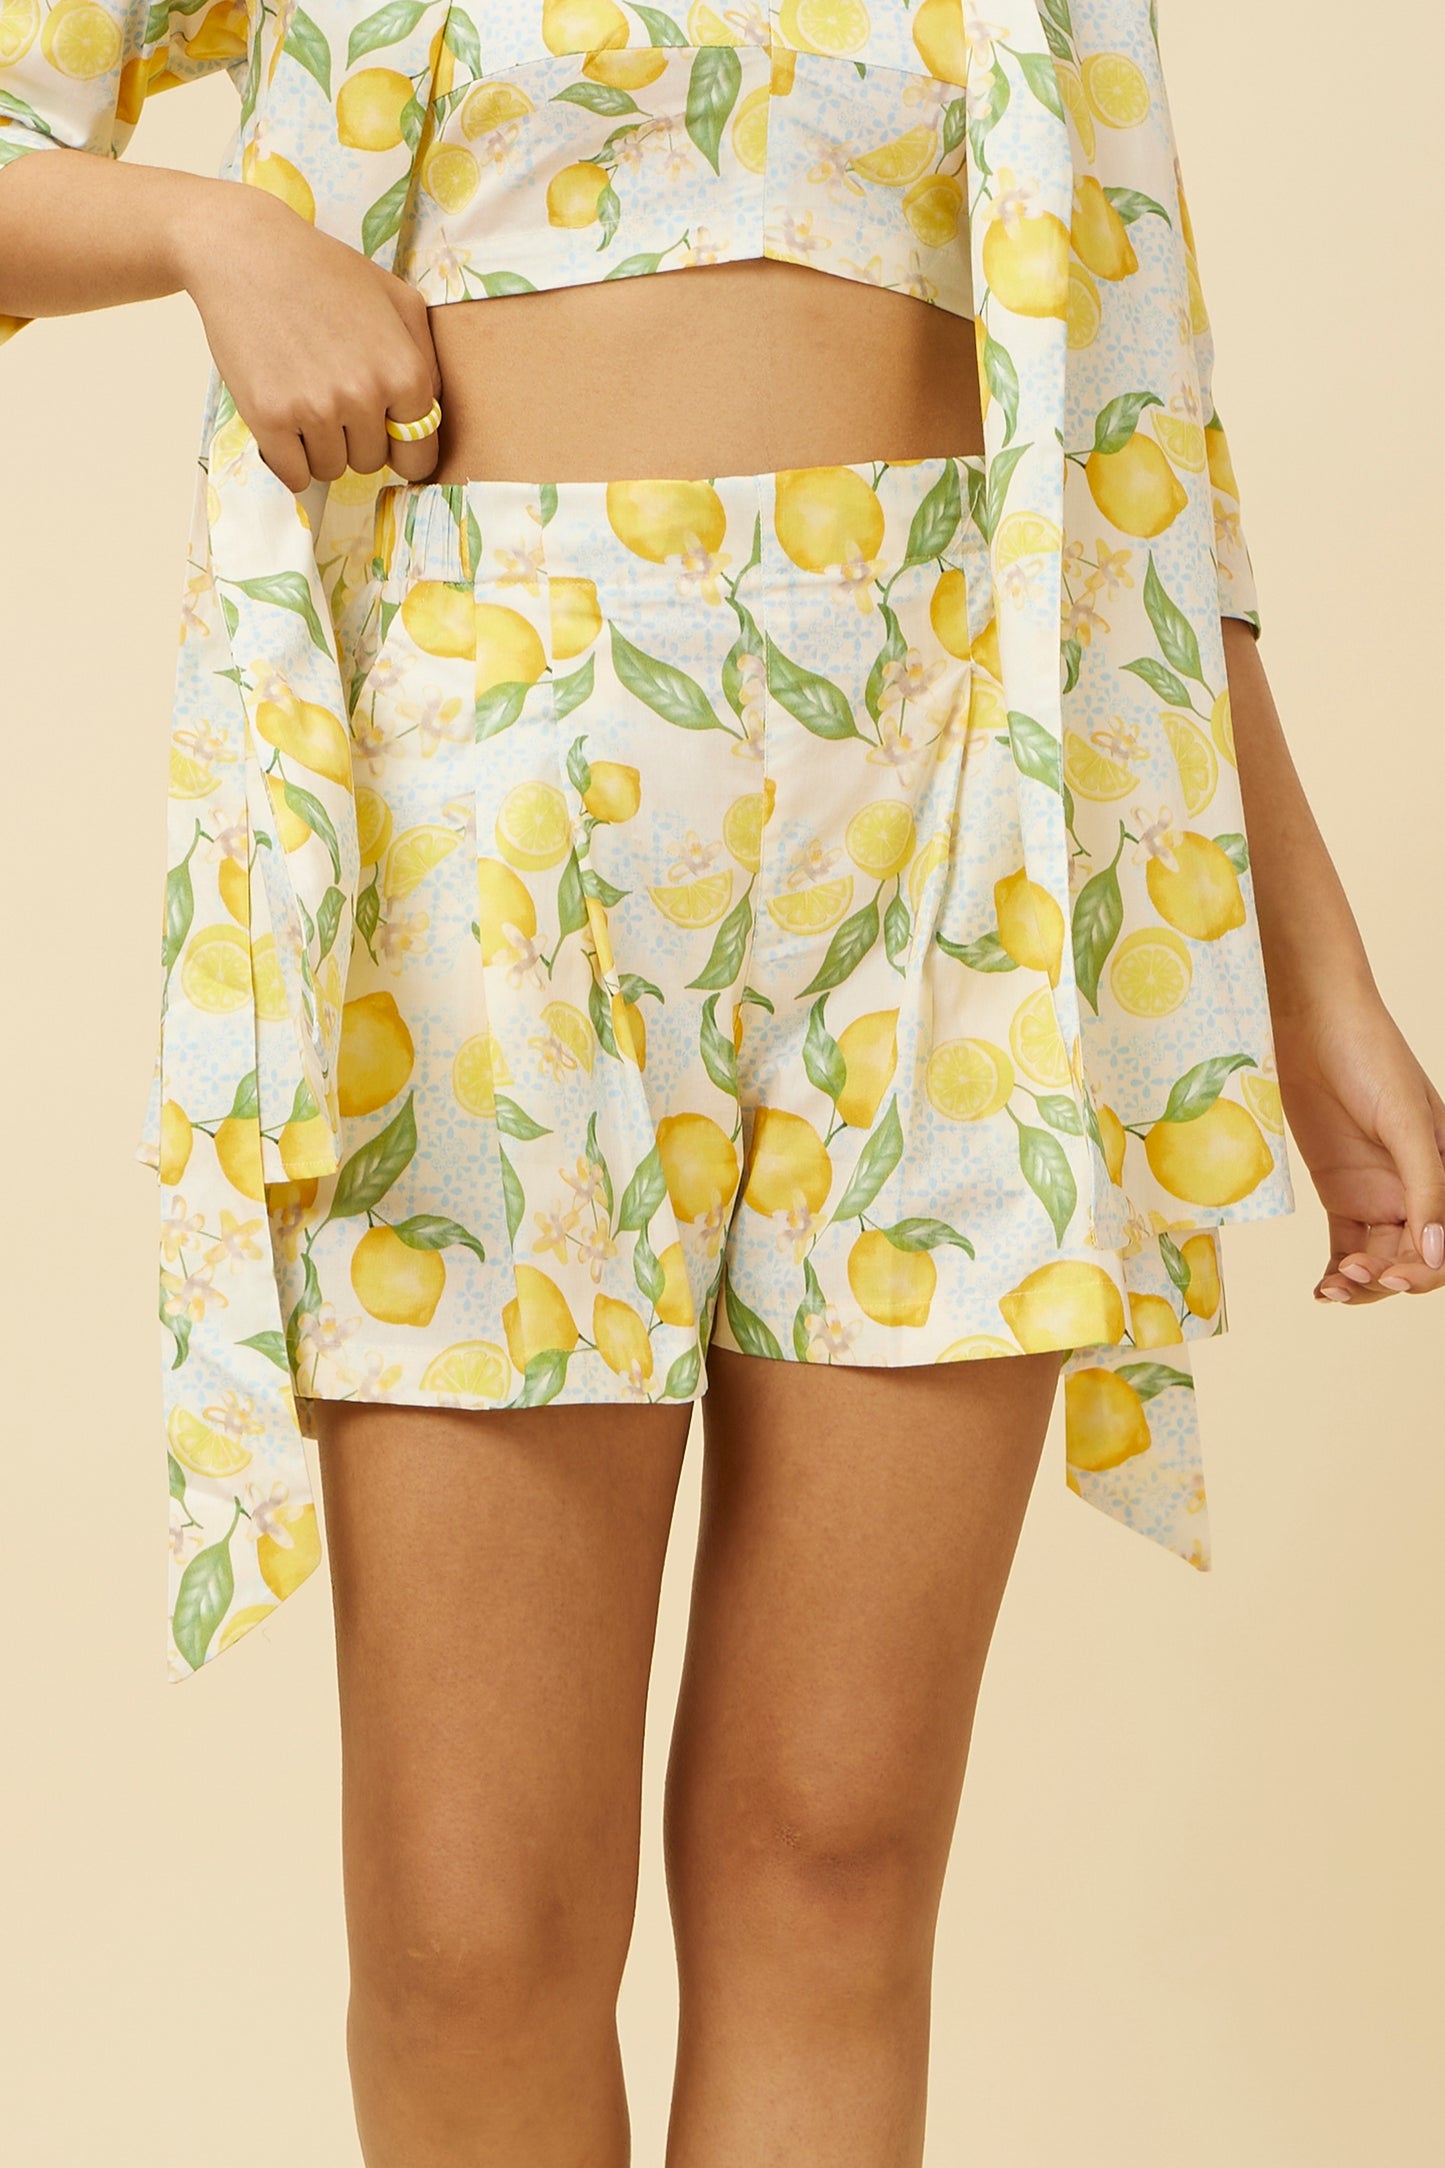 Detailed close-up of the Citrus Dream Shorts featuring an elastic back for comfort, a stylish front patch belt, and a playful lemon tile print on a white base, perfect for a vibrant summer wardrobe addition.